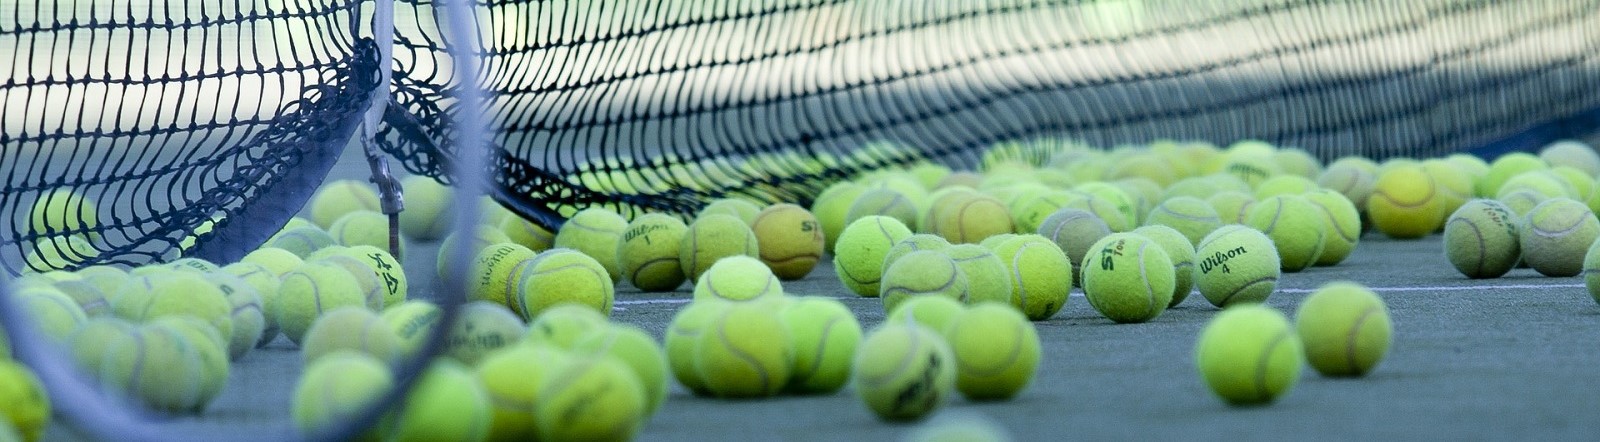 Image by HeungSoon from Pixabay of tennis court and balls